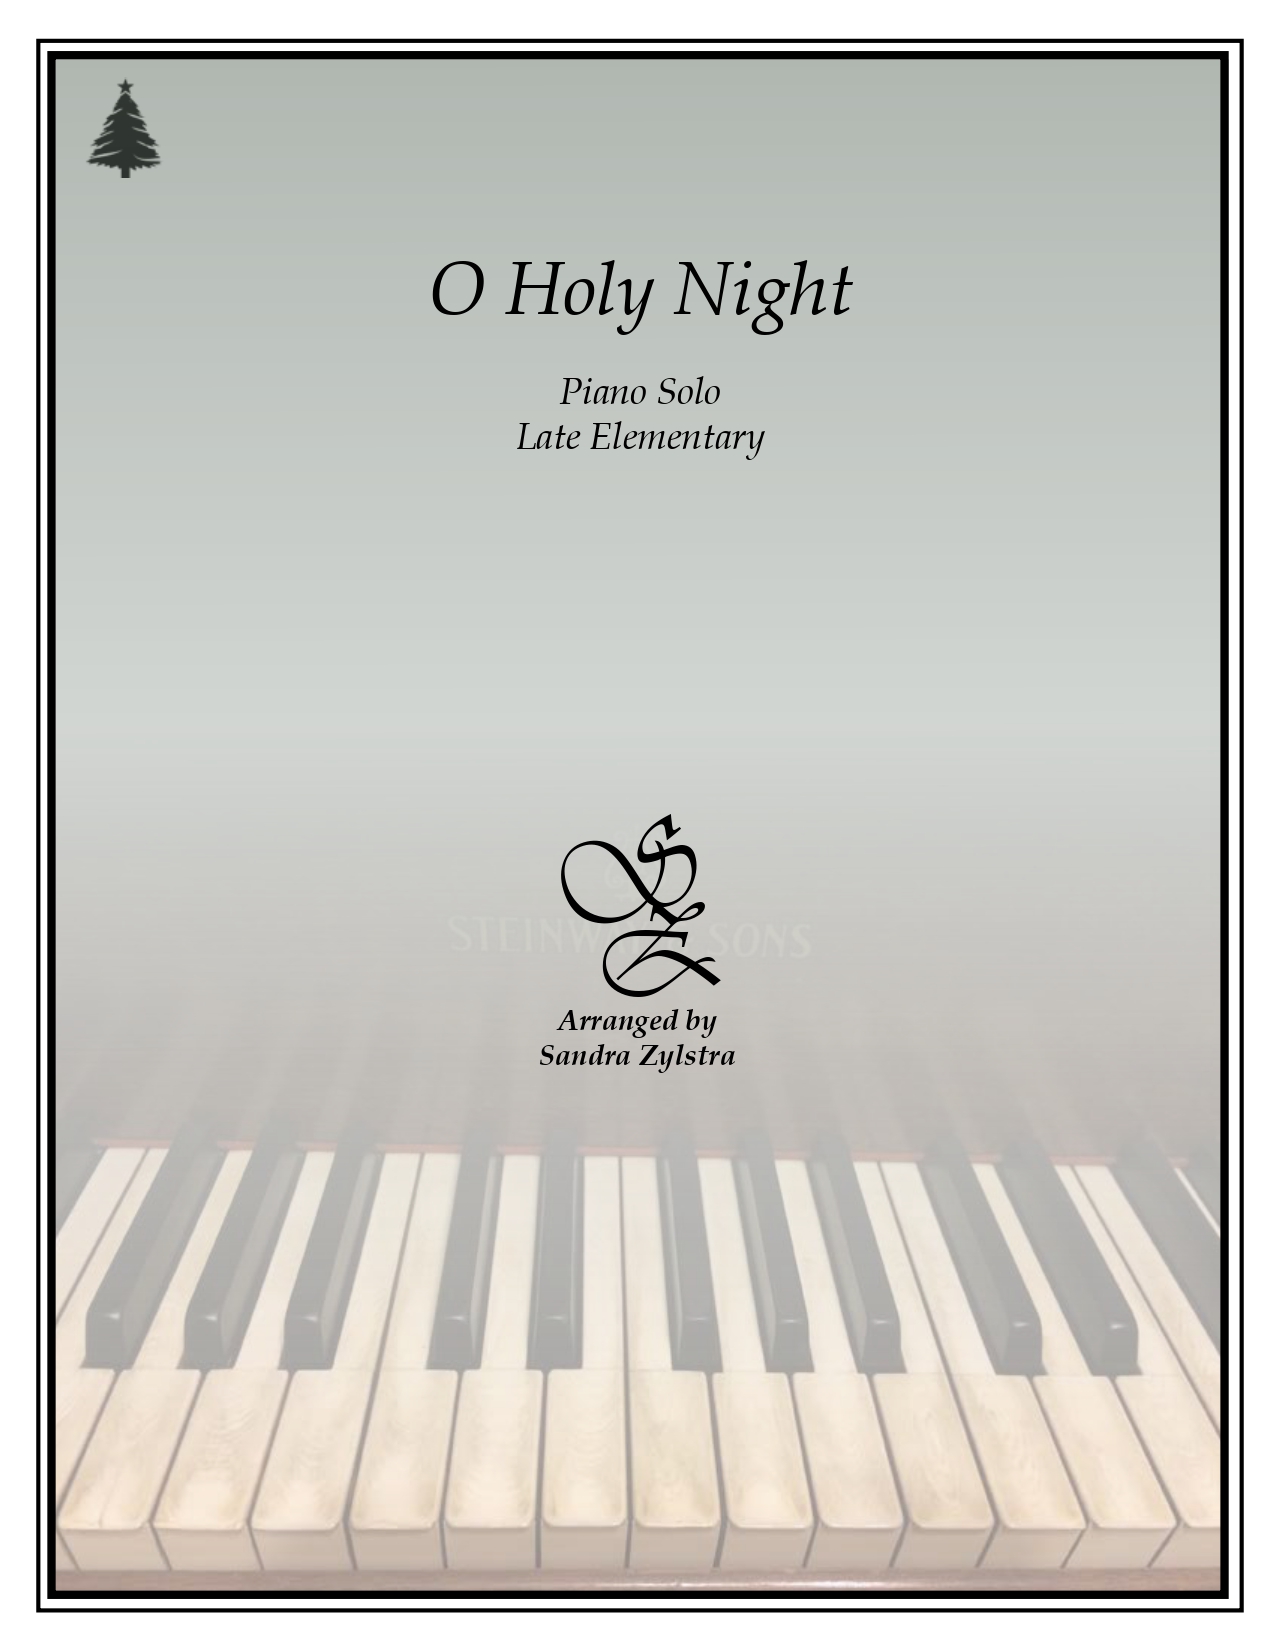 O Holy Night late elementary piano solo cover page 00011